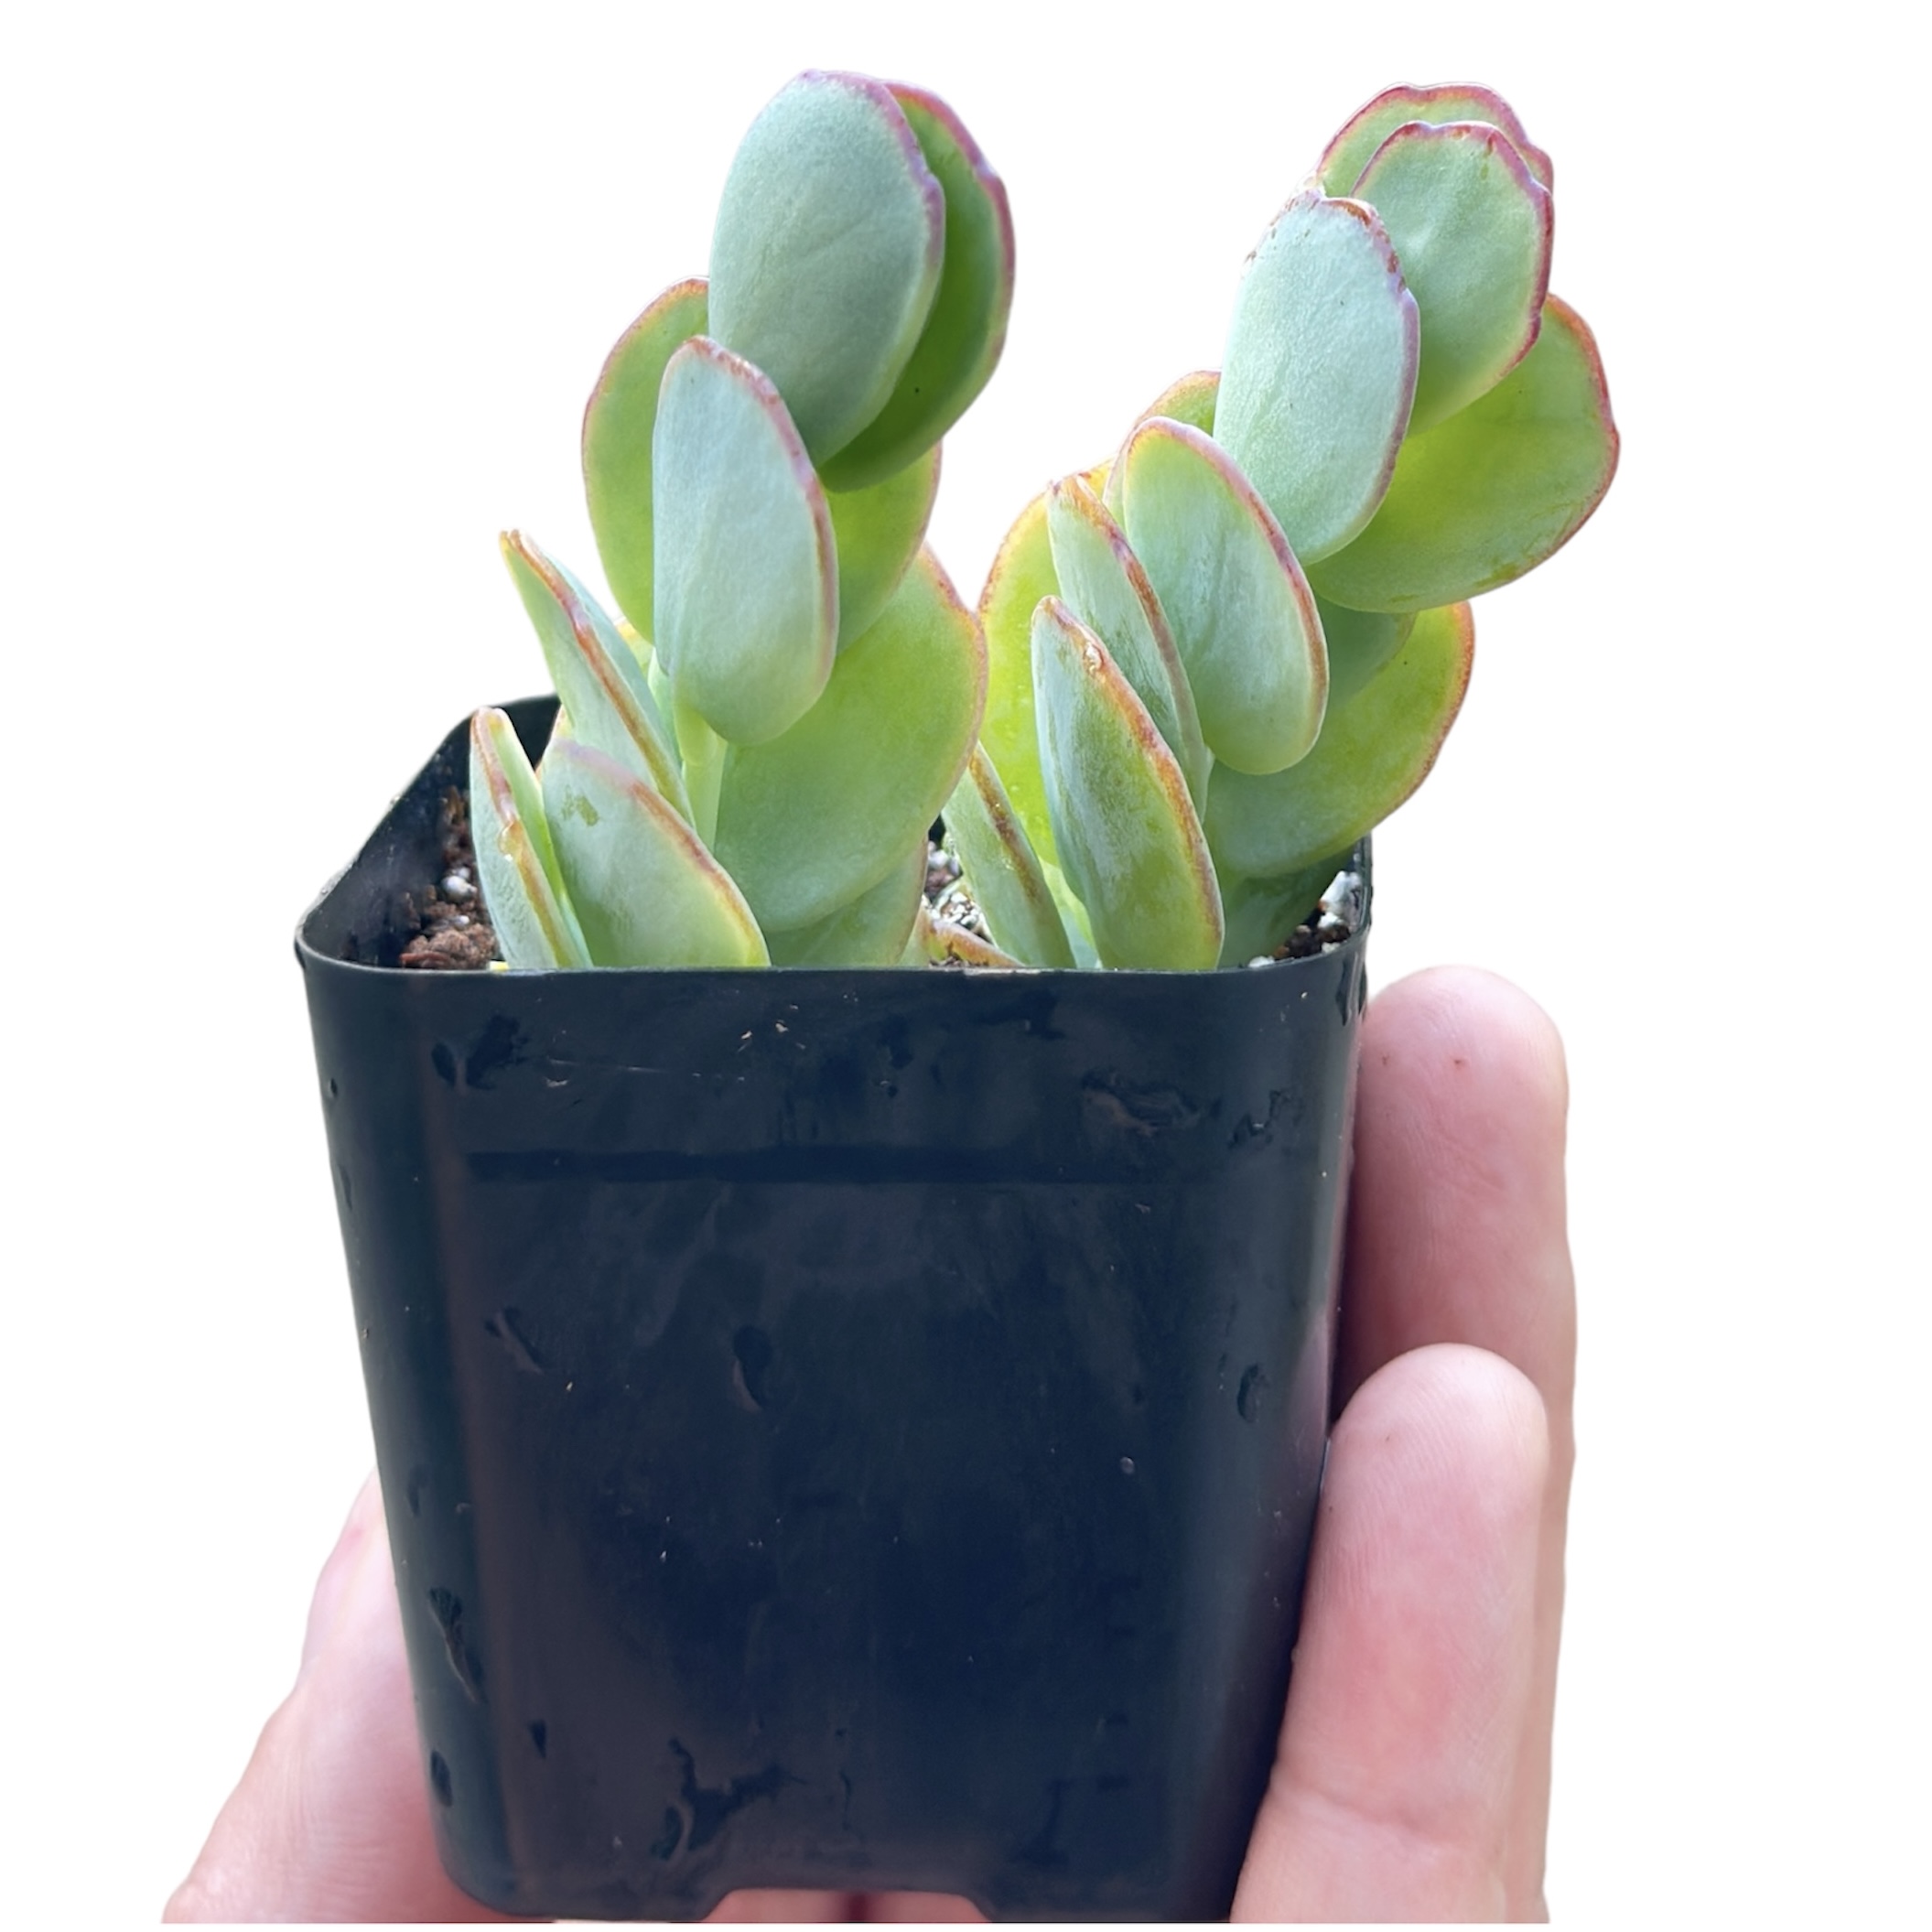 

Live Succulent Plant, Fully Rooted Succulents In 2 In Pot, Marnier's Kalanchoe/ Kalanchoe Marnieriana/ Kalanchoe Panamensis Fully Rooted, 2 Plants In A Pot